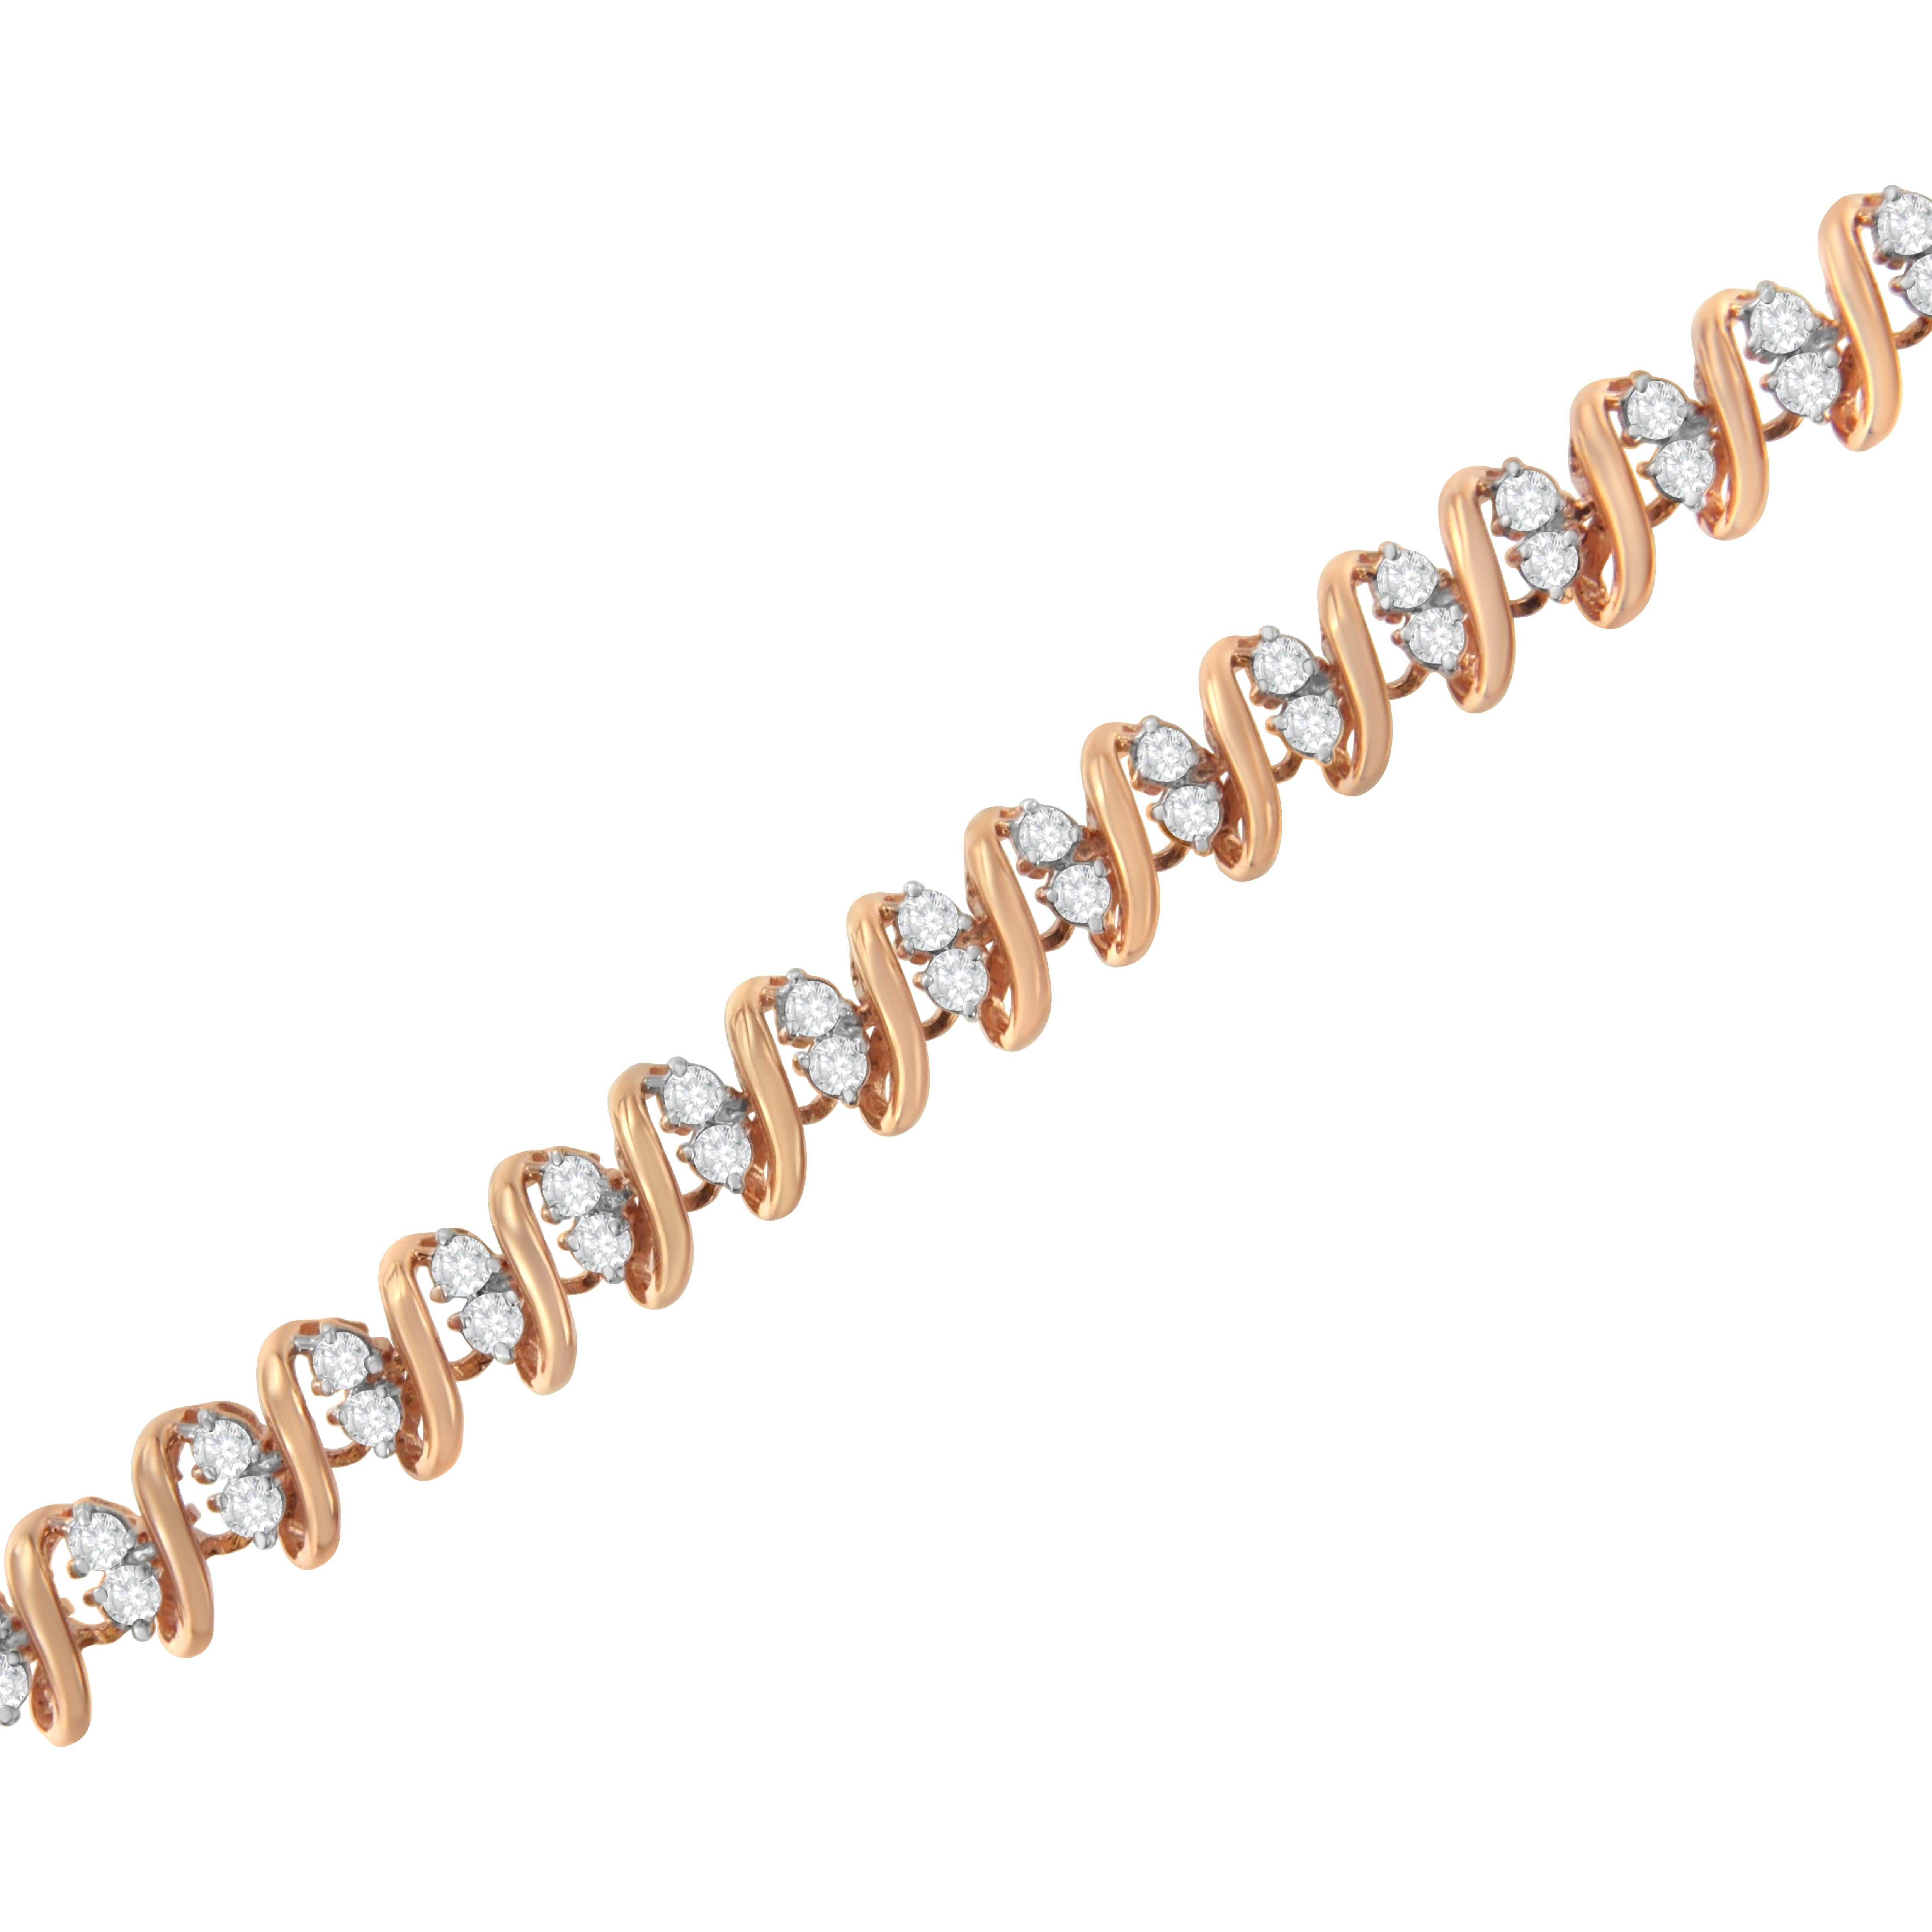 Contemporary Rose Gold Plated Sterling Silver 2.0 Carat Diamond S Link Tennis Bracelet For Sale